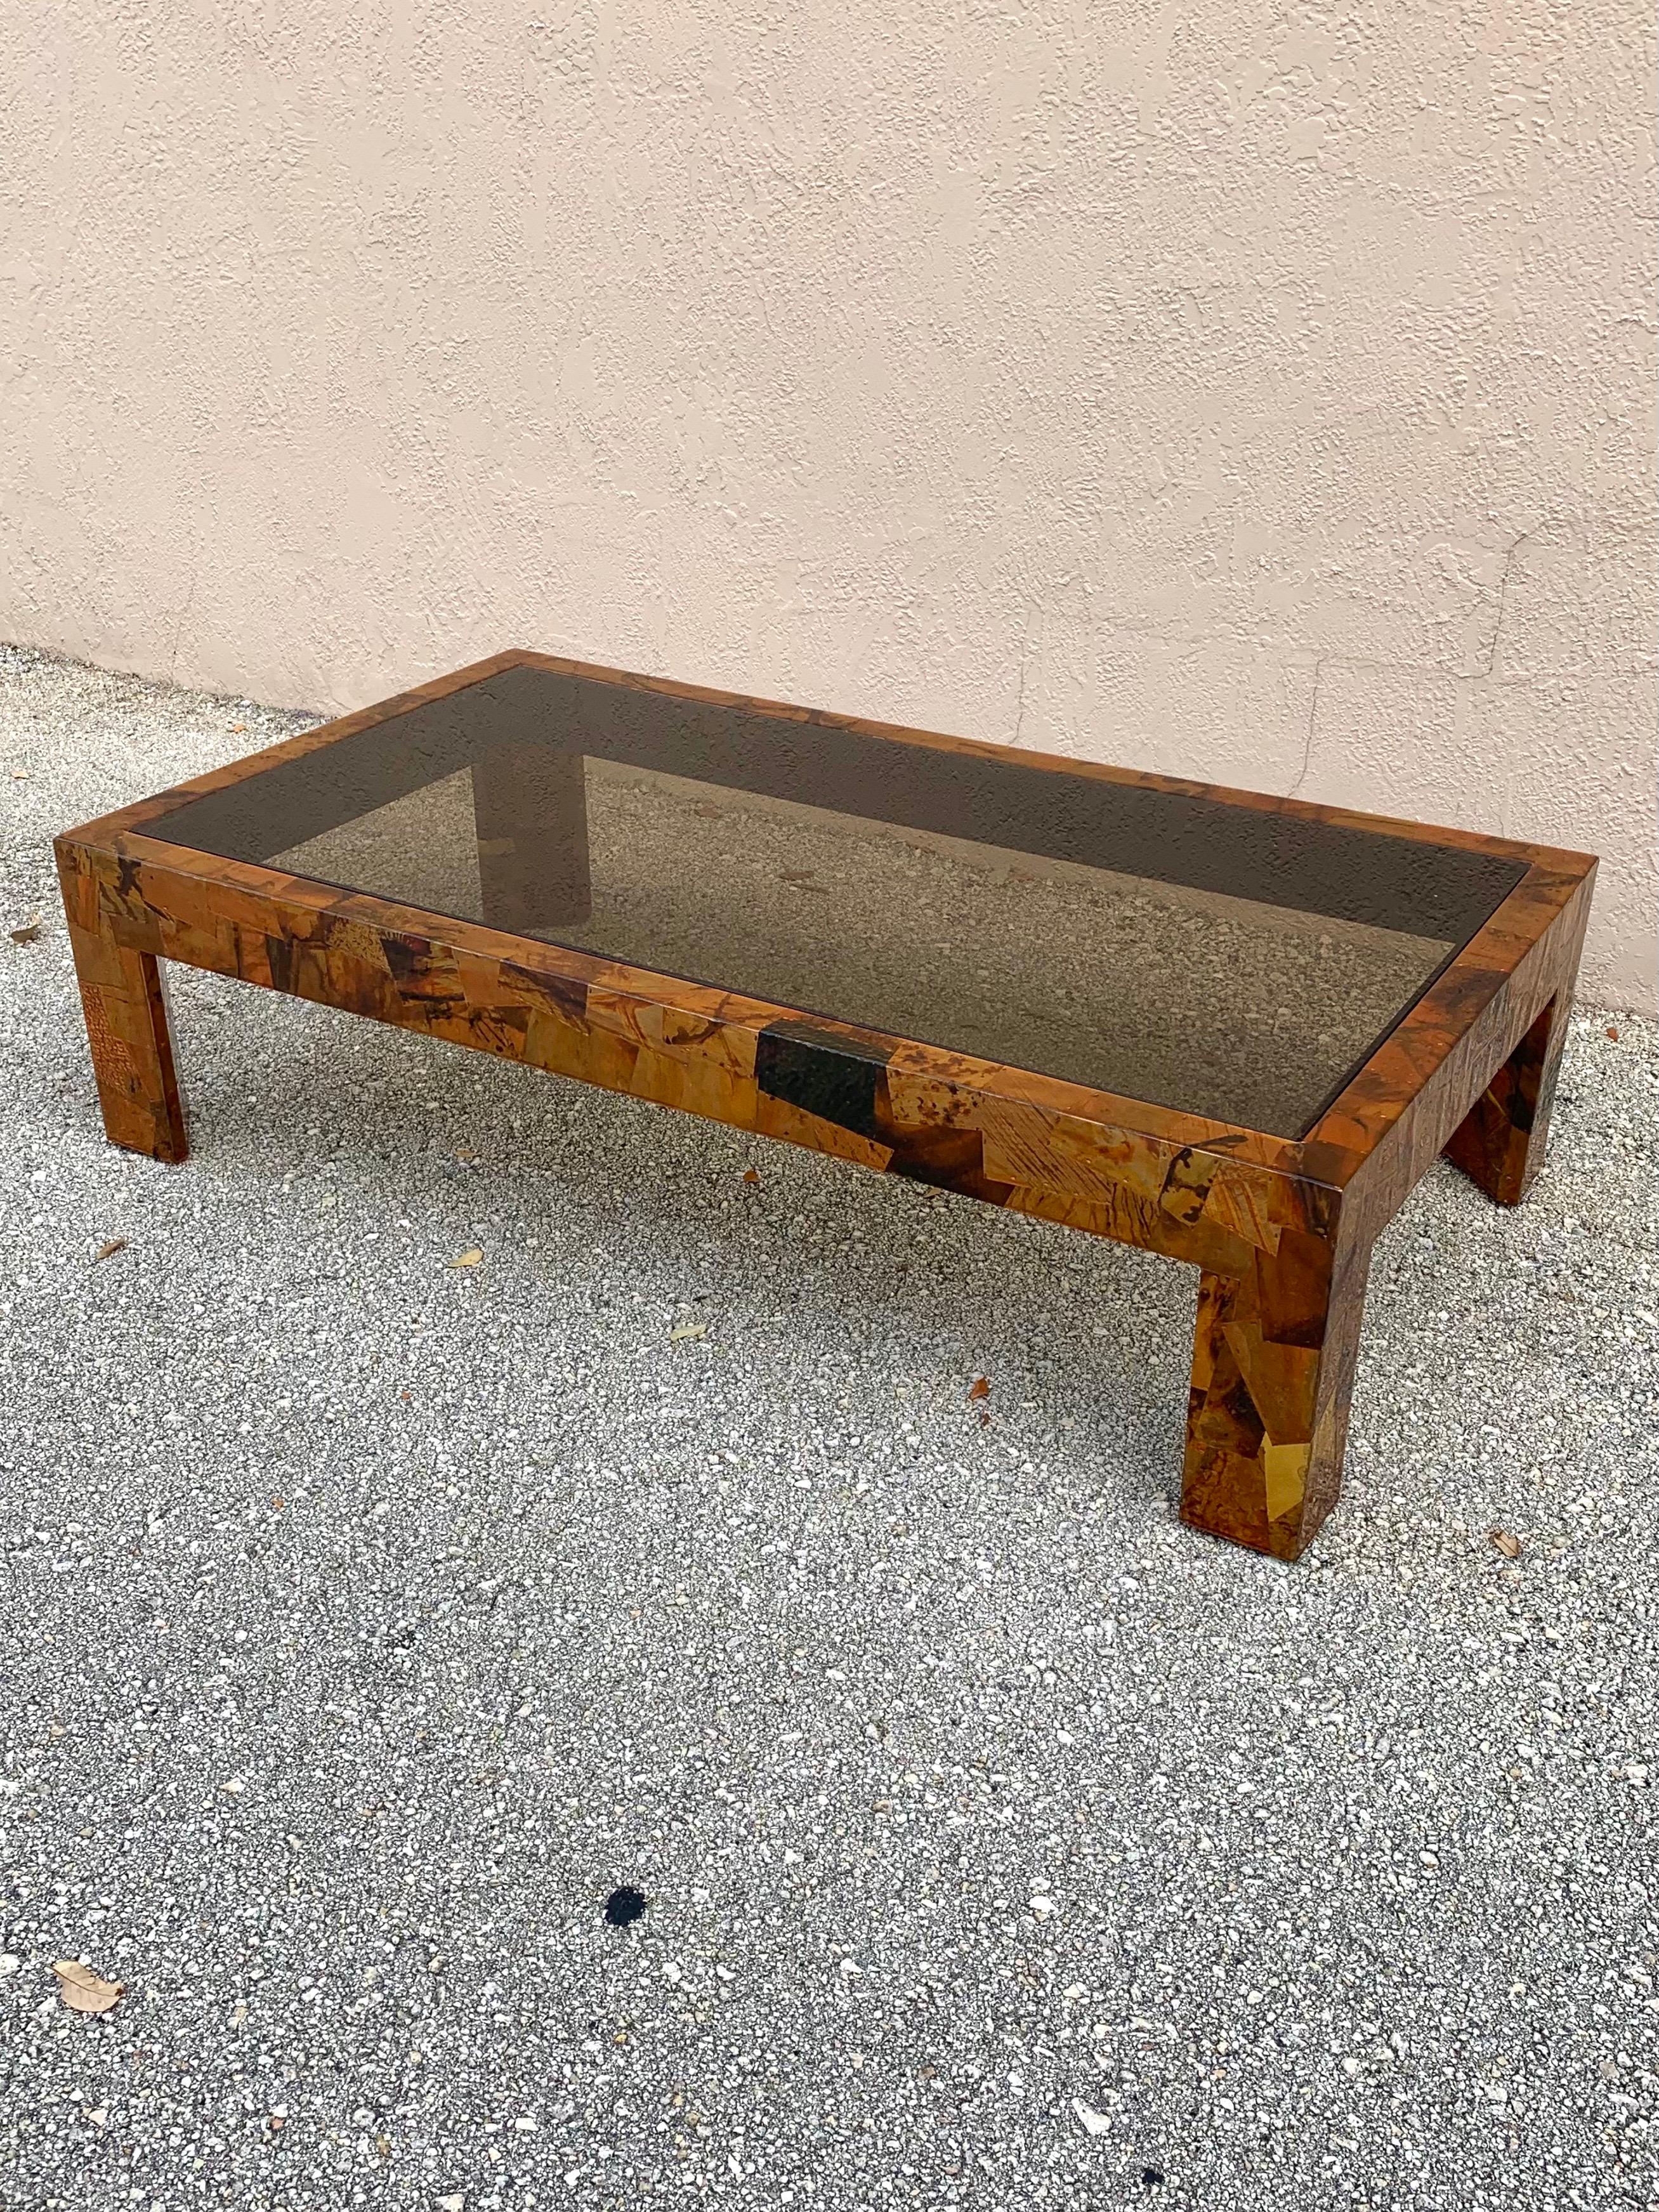 table with glass in middle